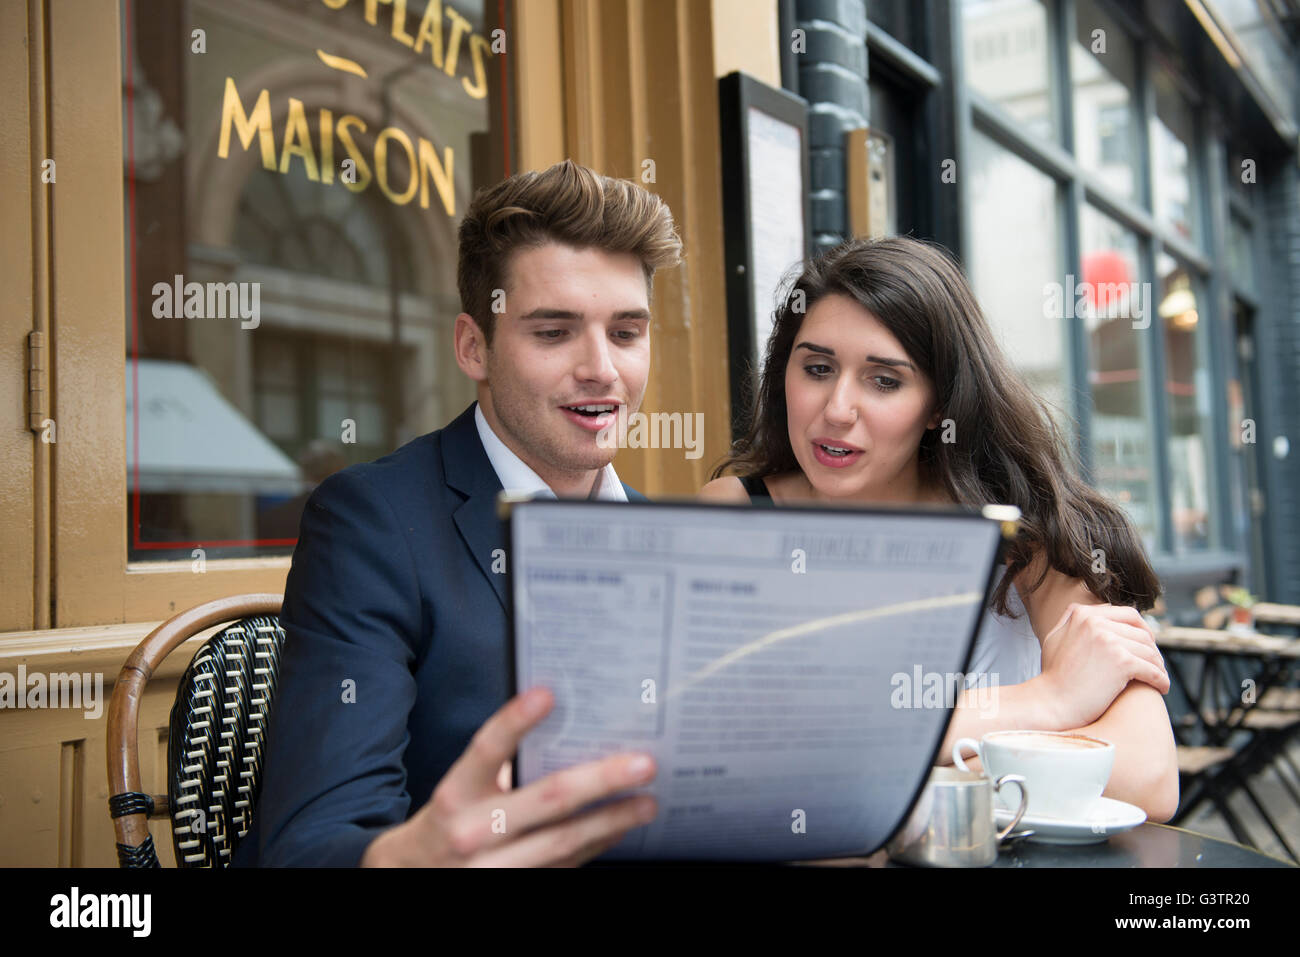 A young couple looking at a menu outside a cafe in Covent Garden in London. Stock Photo